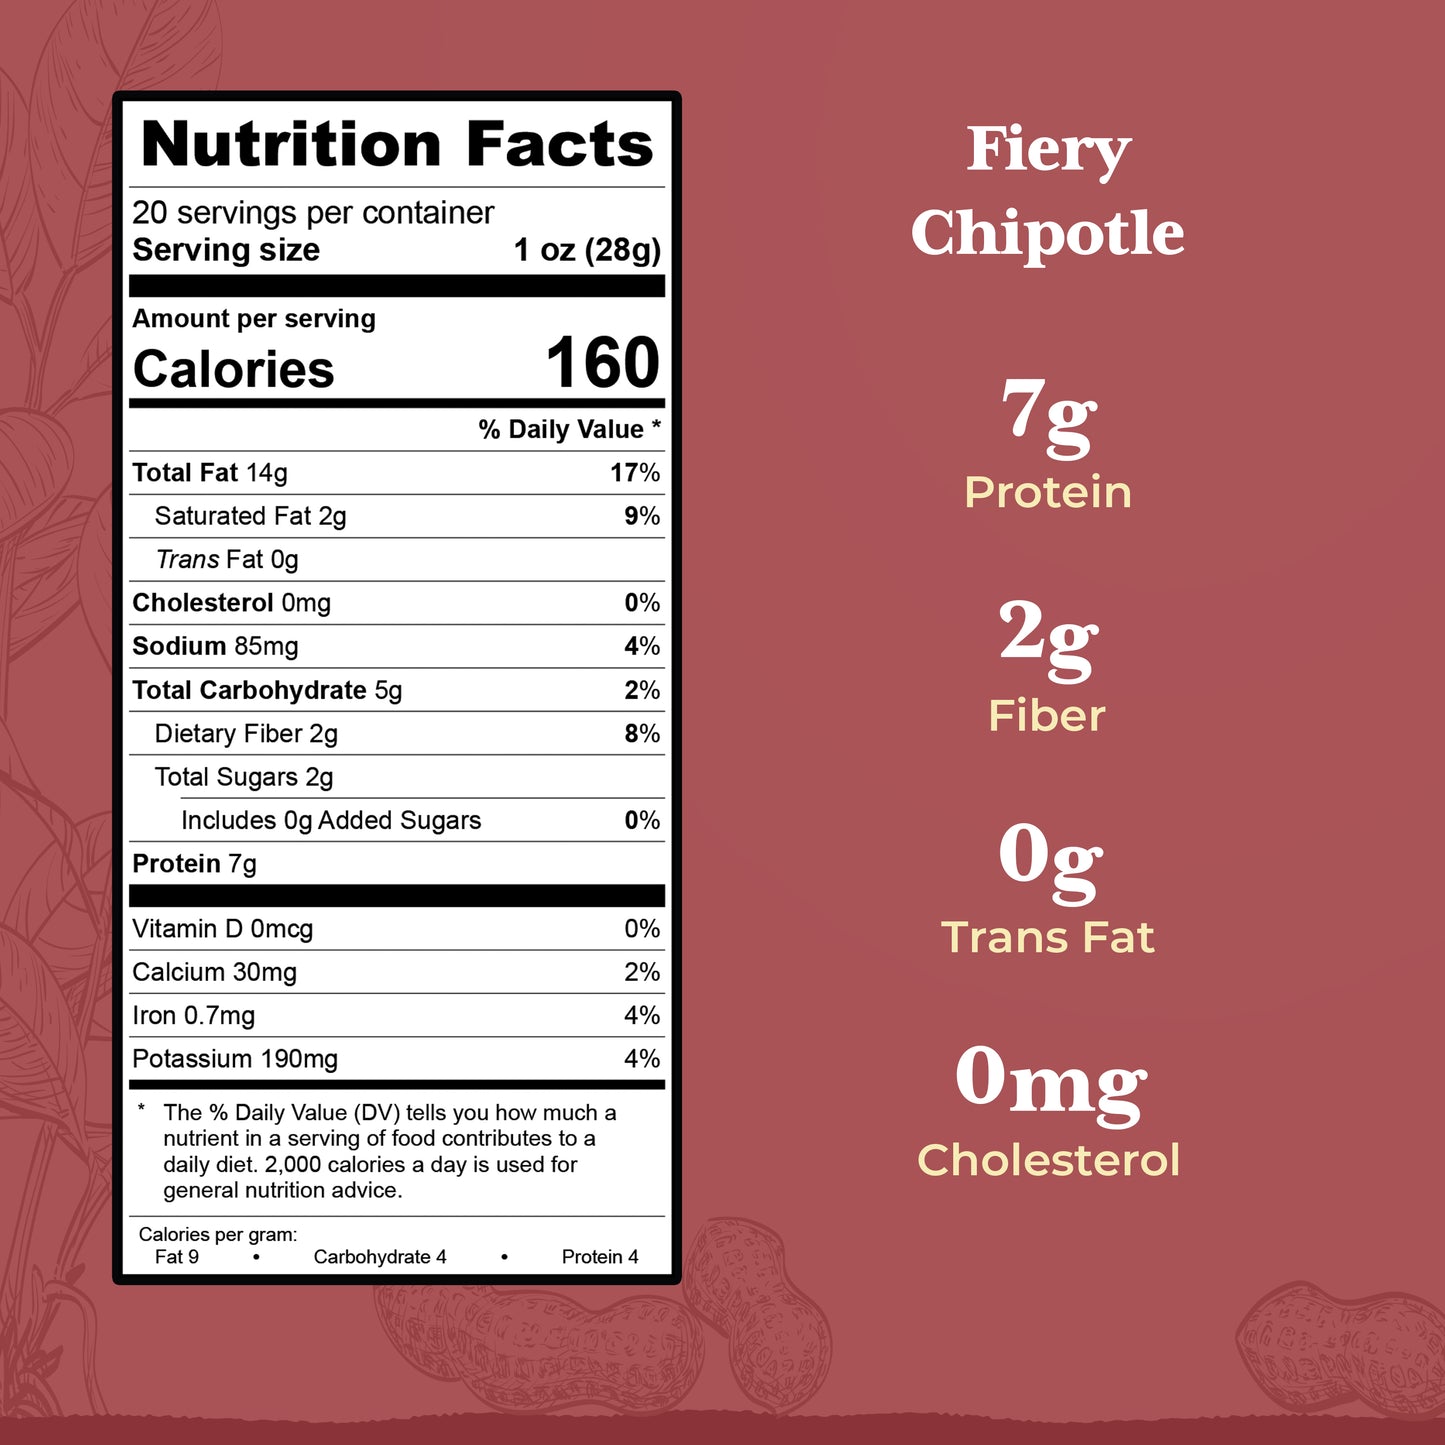 Fiery Chipotle